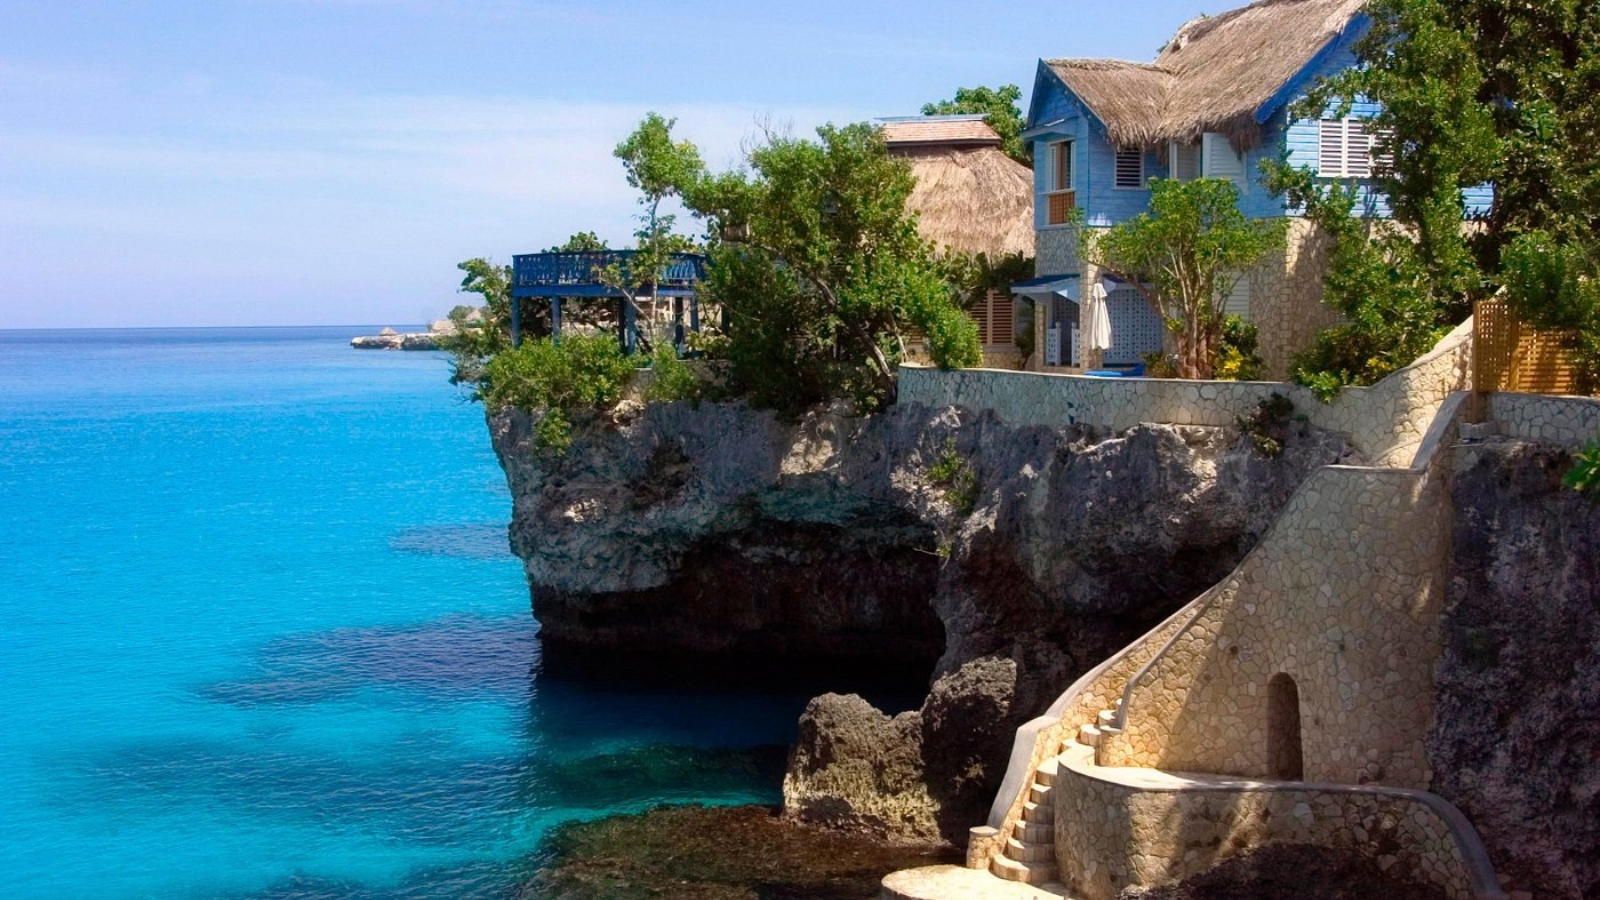 <p>Perched in the picturesque town of Negril, The Caves offers an intimate, cliffside retreat with sweeping ocean views and unique accommodations nestled within natural caves. This boutique hotel features 12 vibrant cottages and suites that blend seamlessly with the surroundings, providing a serene and private escape. </p> <p>One of its standout features is the private cave dining experience, where guests can enjoy romantic candlelit dinners by the sea. With amenities like a saltwater pool, cliff jumping, snorkeling, and a tranquil spa, The Caves delivers an unforgettable blend of adventure, relaxation, and Jamaican charm.</p>